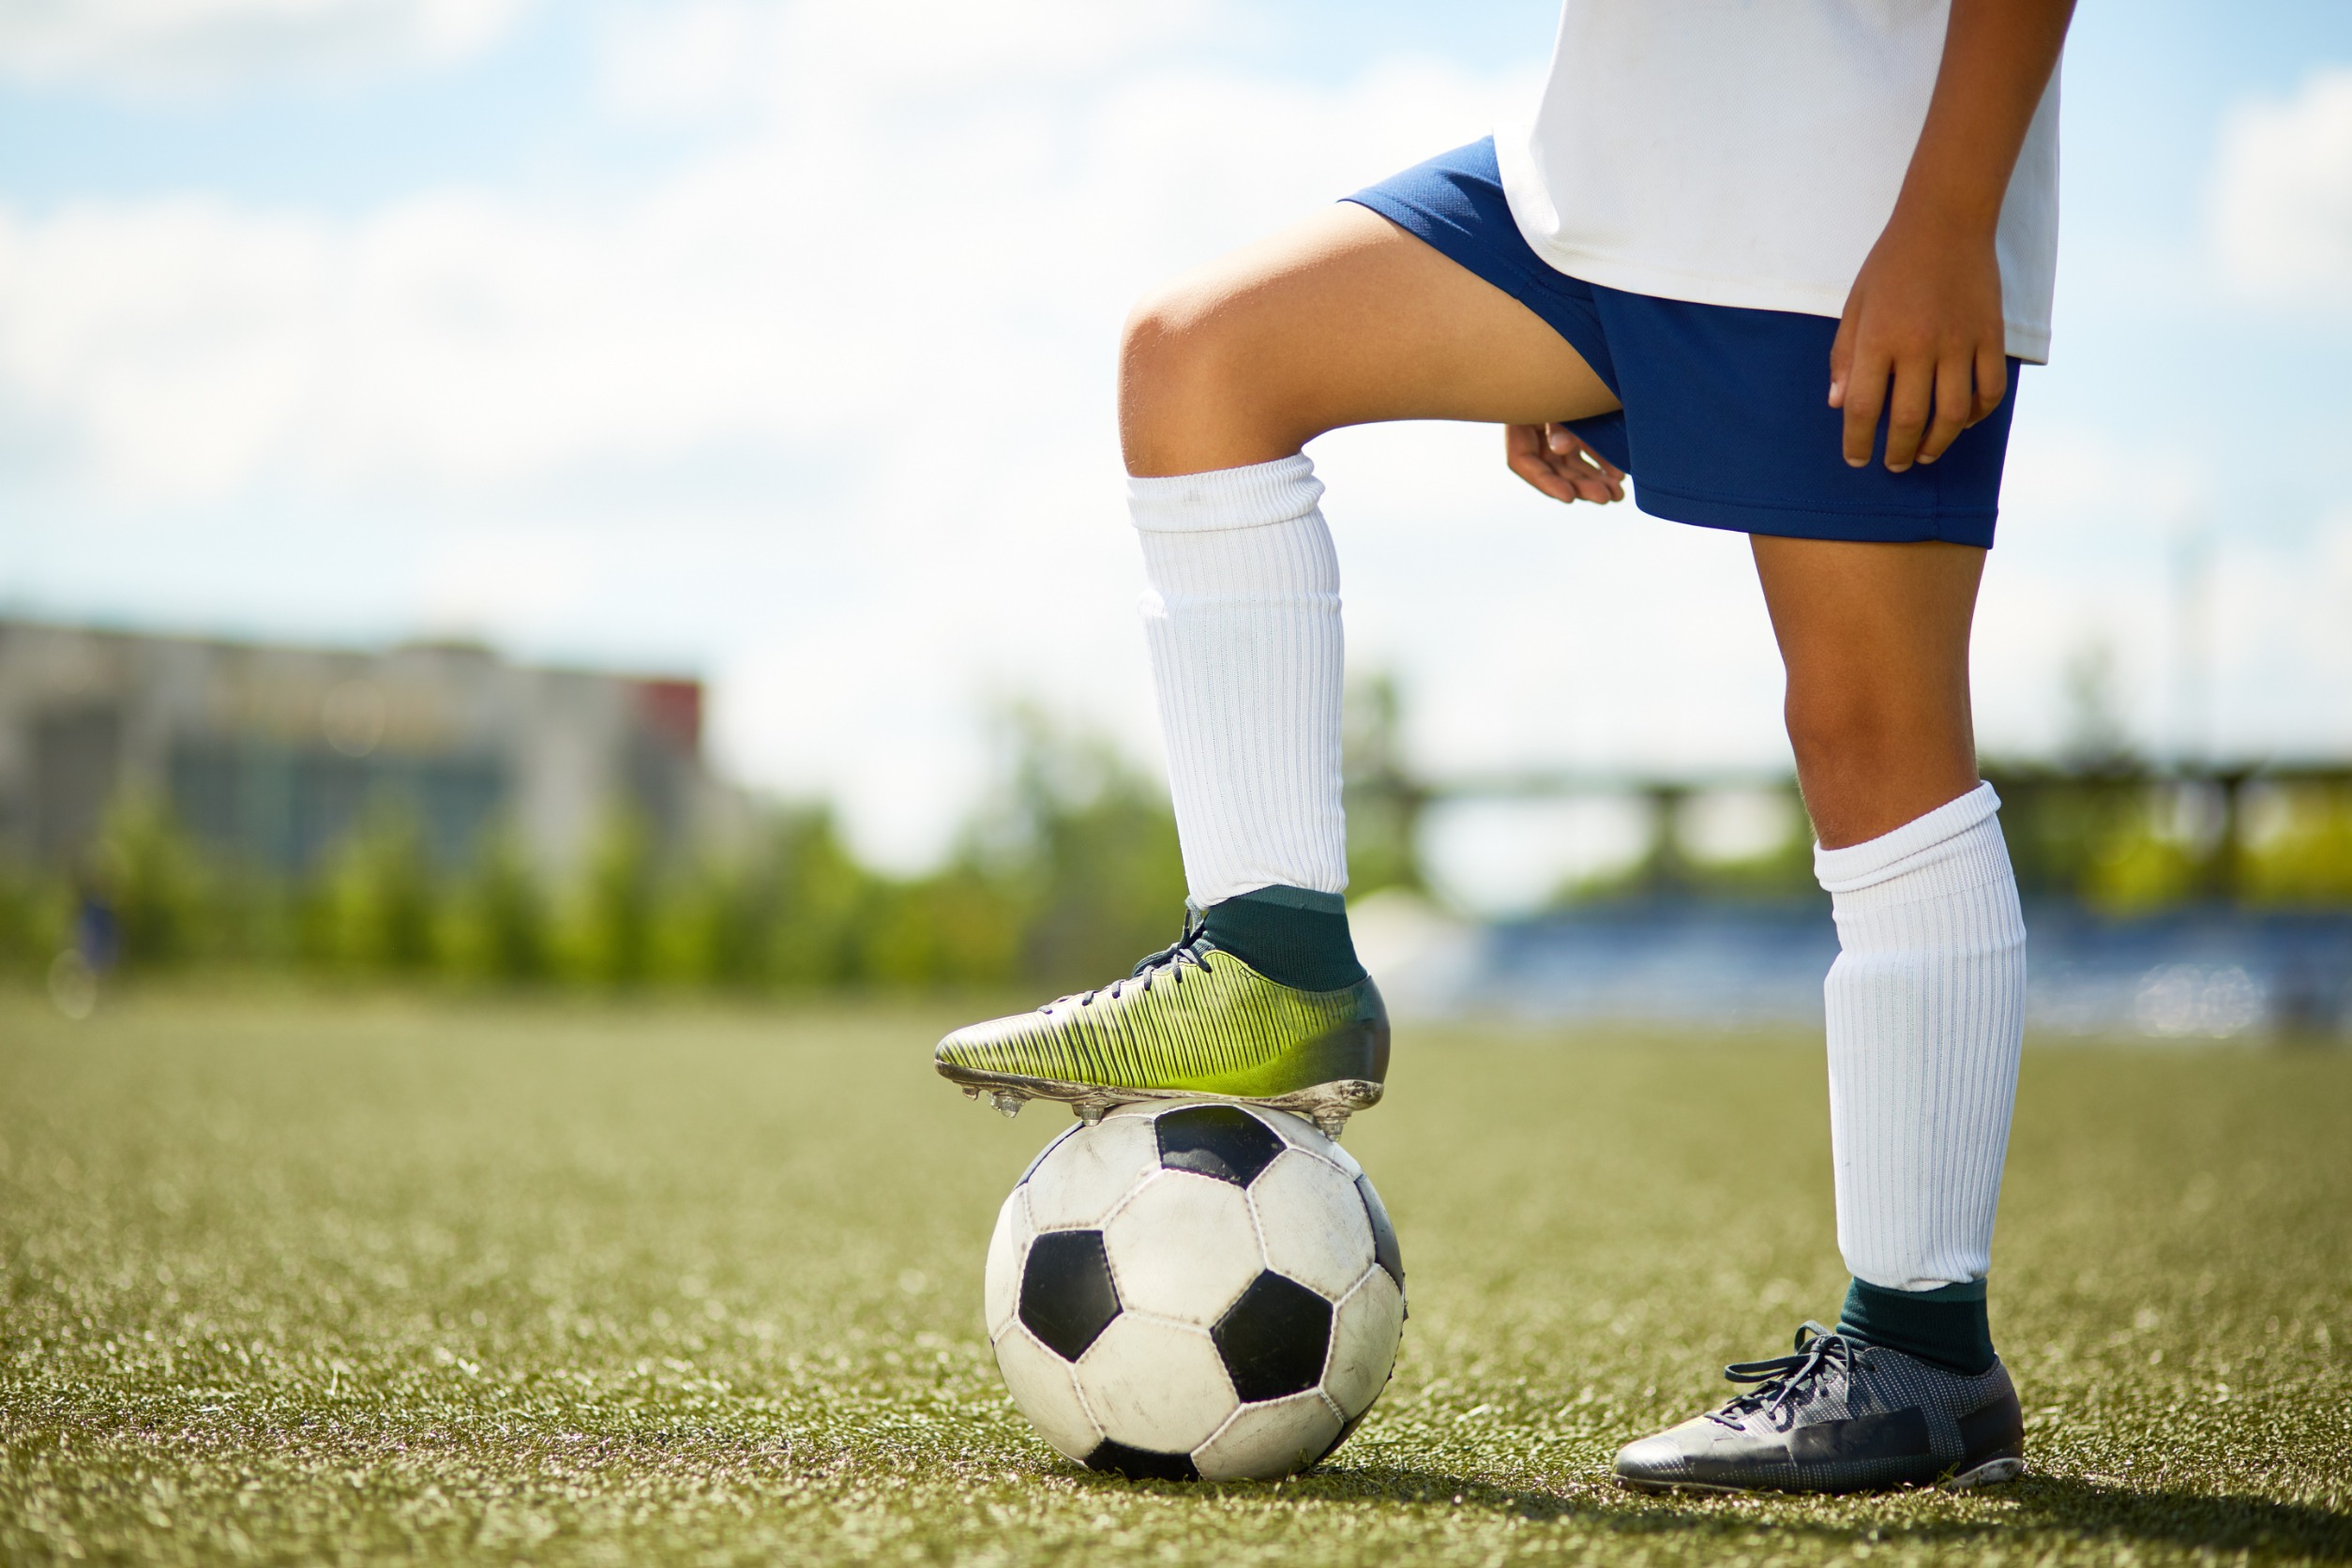 Soccer player standing with foot on top of ball